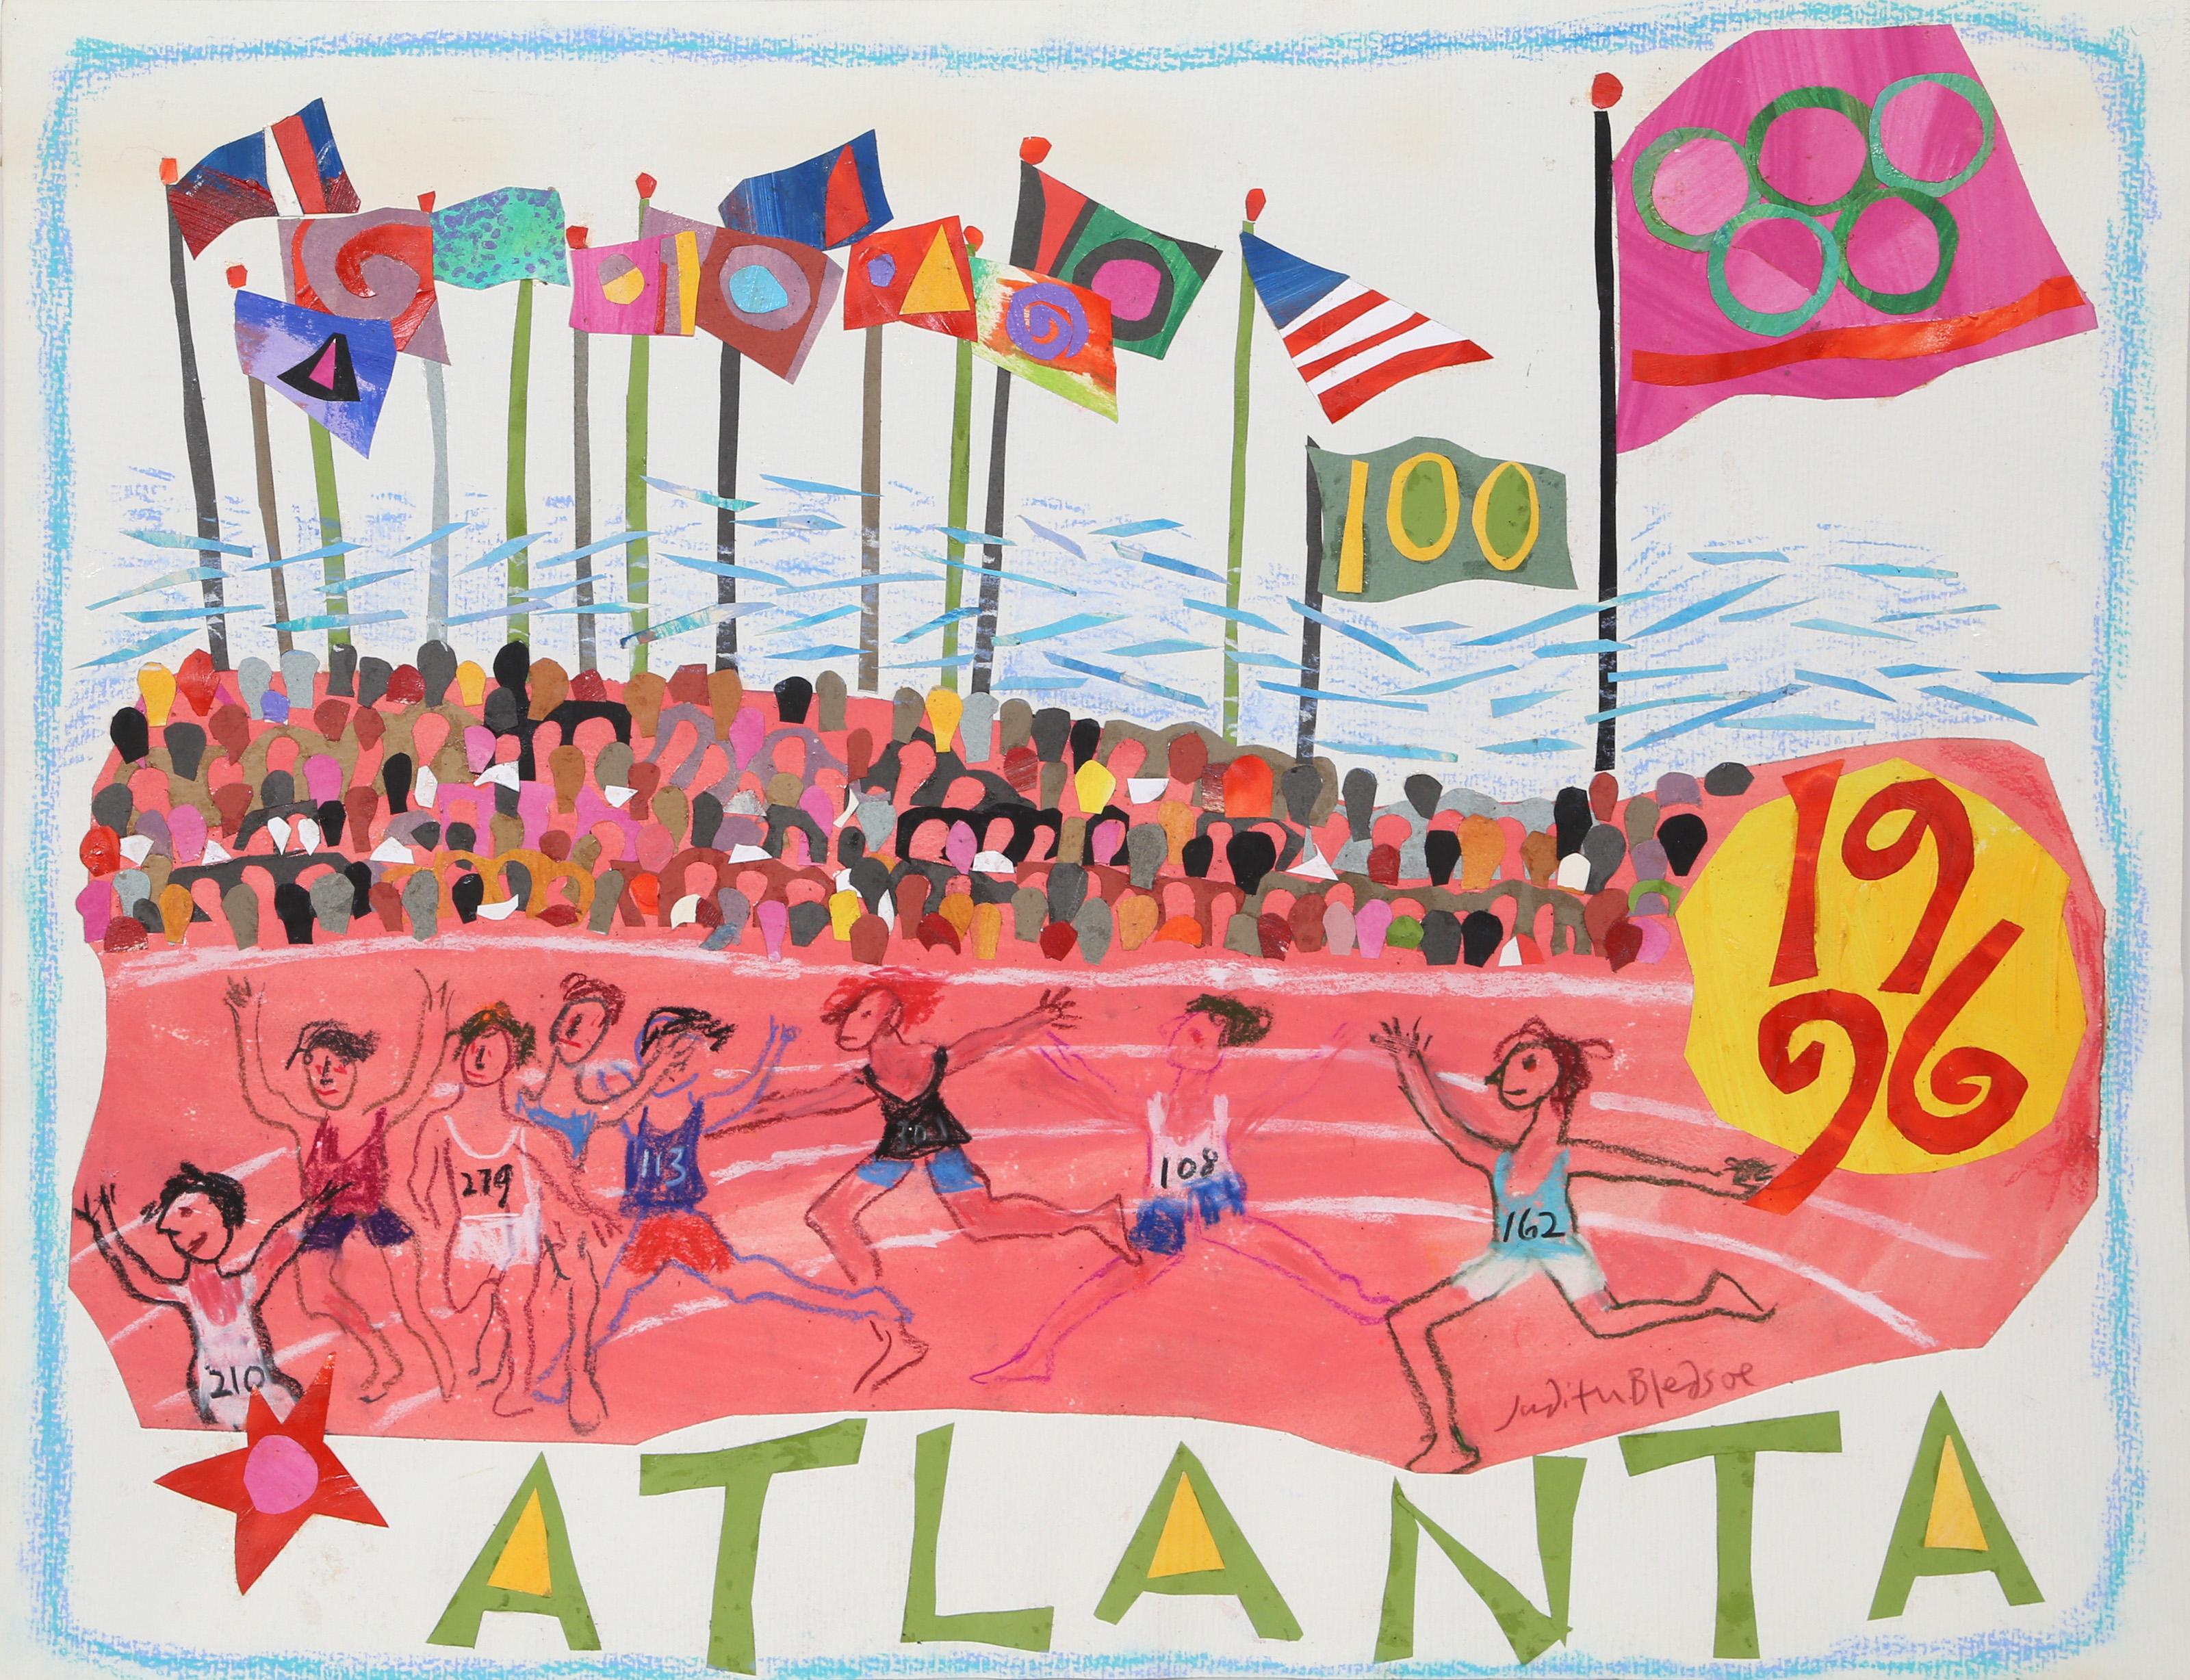 Judith Bledsoe, American (1938 - 2013) -  Atlanta Olympics - 100m Race. Year: circa 1996, Medium: Pastel and Collage on Paper, signed l.r., Size: 19.5 x 25.5 in. (49.53 x 64.77 cm), Description: Judith Bledsoe's colorful depiction of the 1996